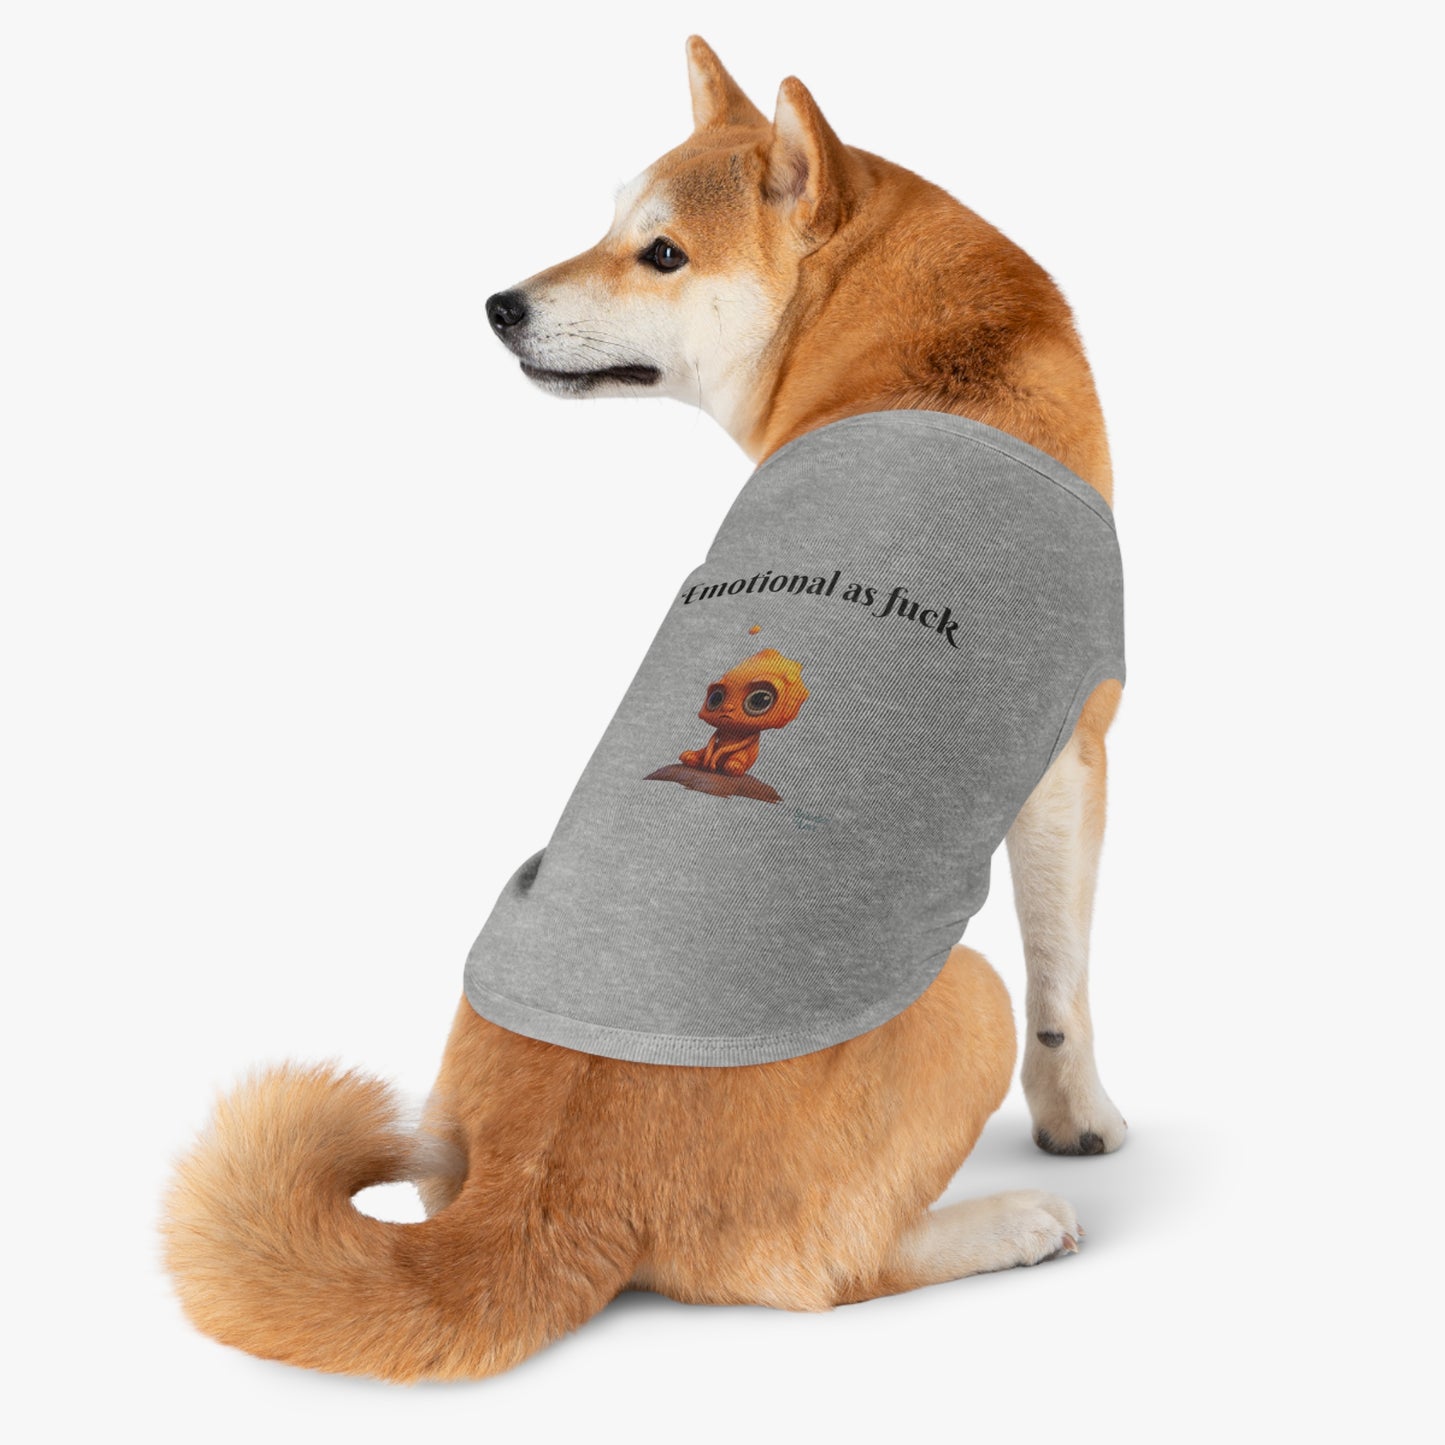 Emotional as Fuck Pet Tank Top - Express Your Pet's Quirky Emotions